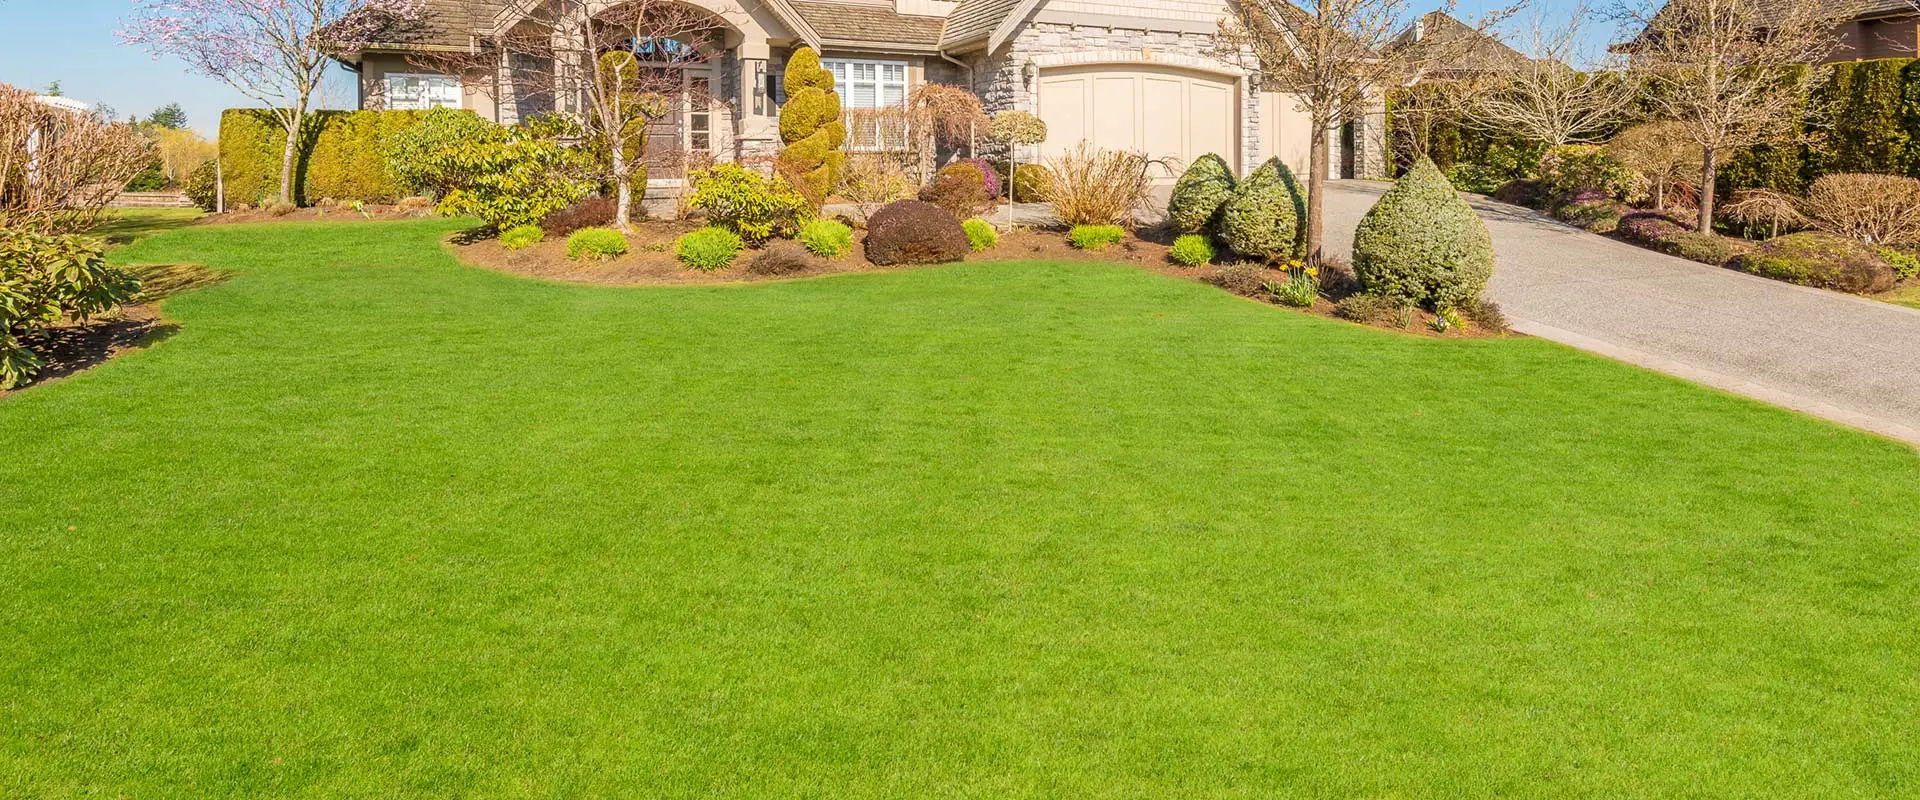 A bright and healthy home lawn near Ashland, OH.